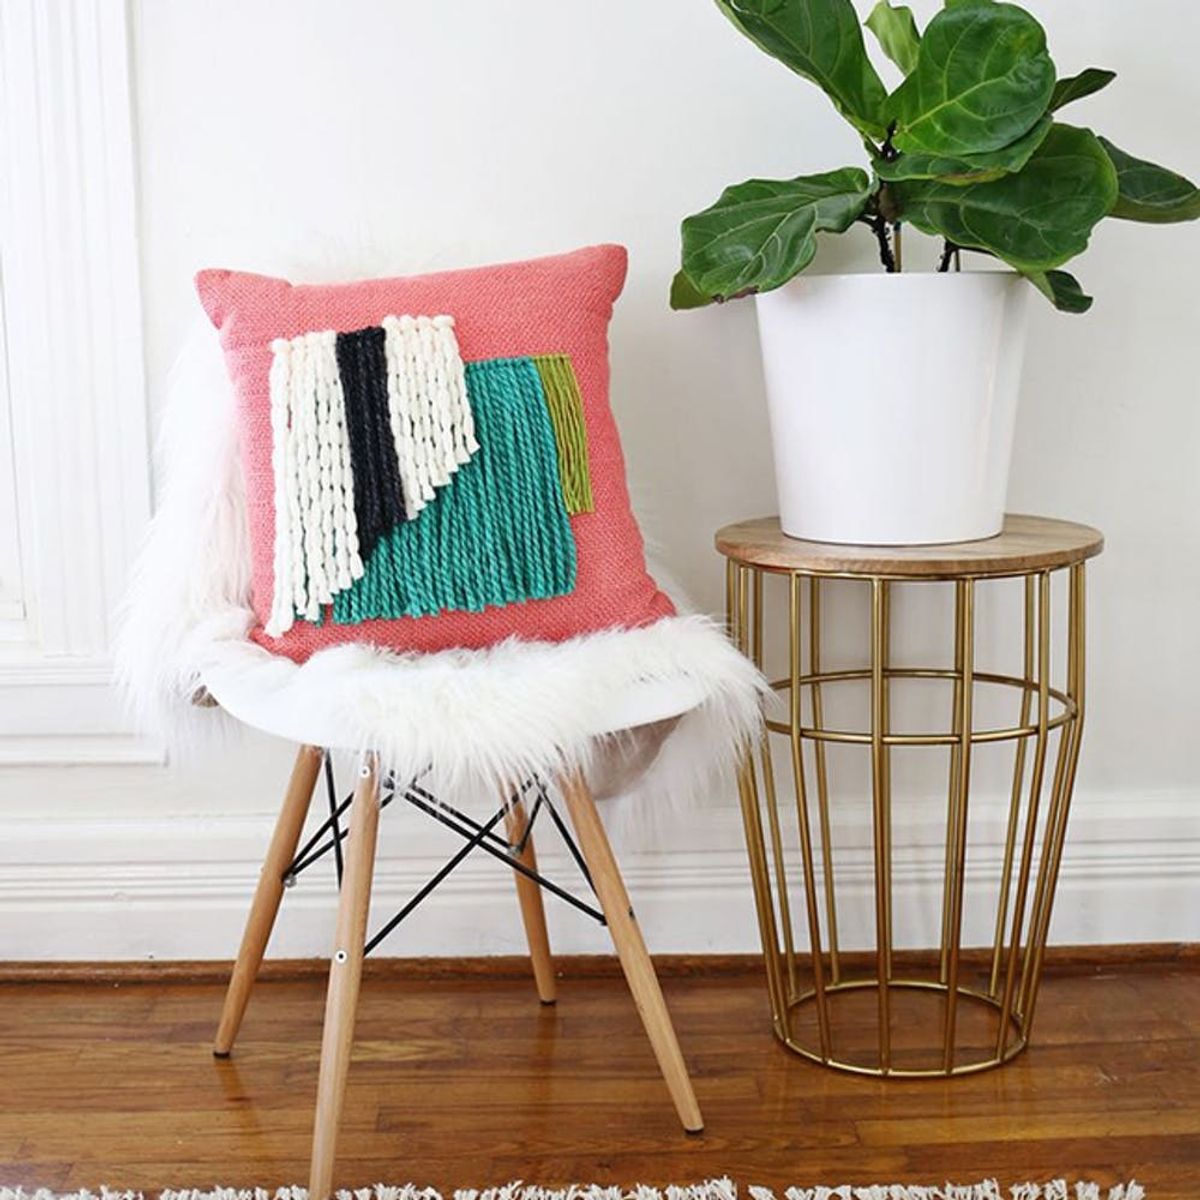 10 Cozy Pillow Upgrades You Can Make With Just a Little Bit of Yarn